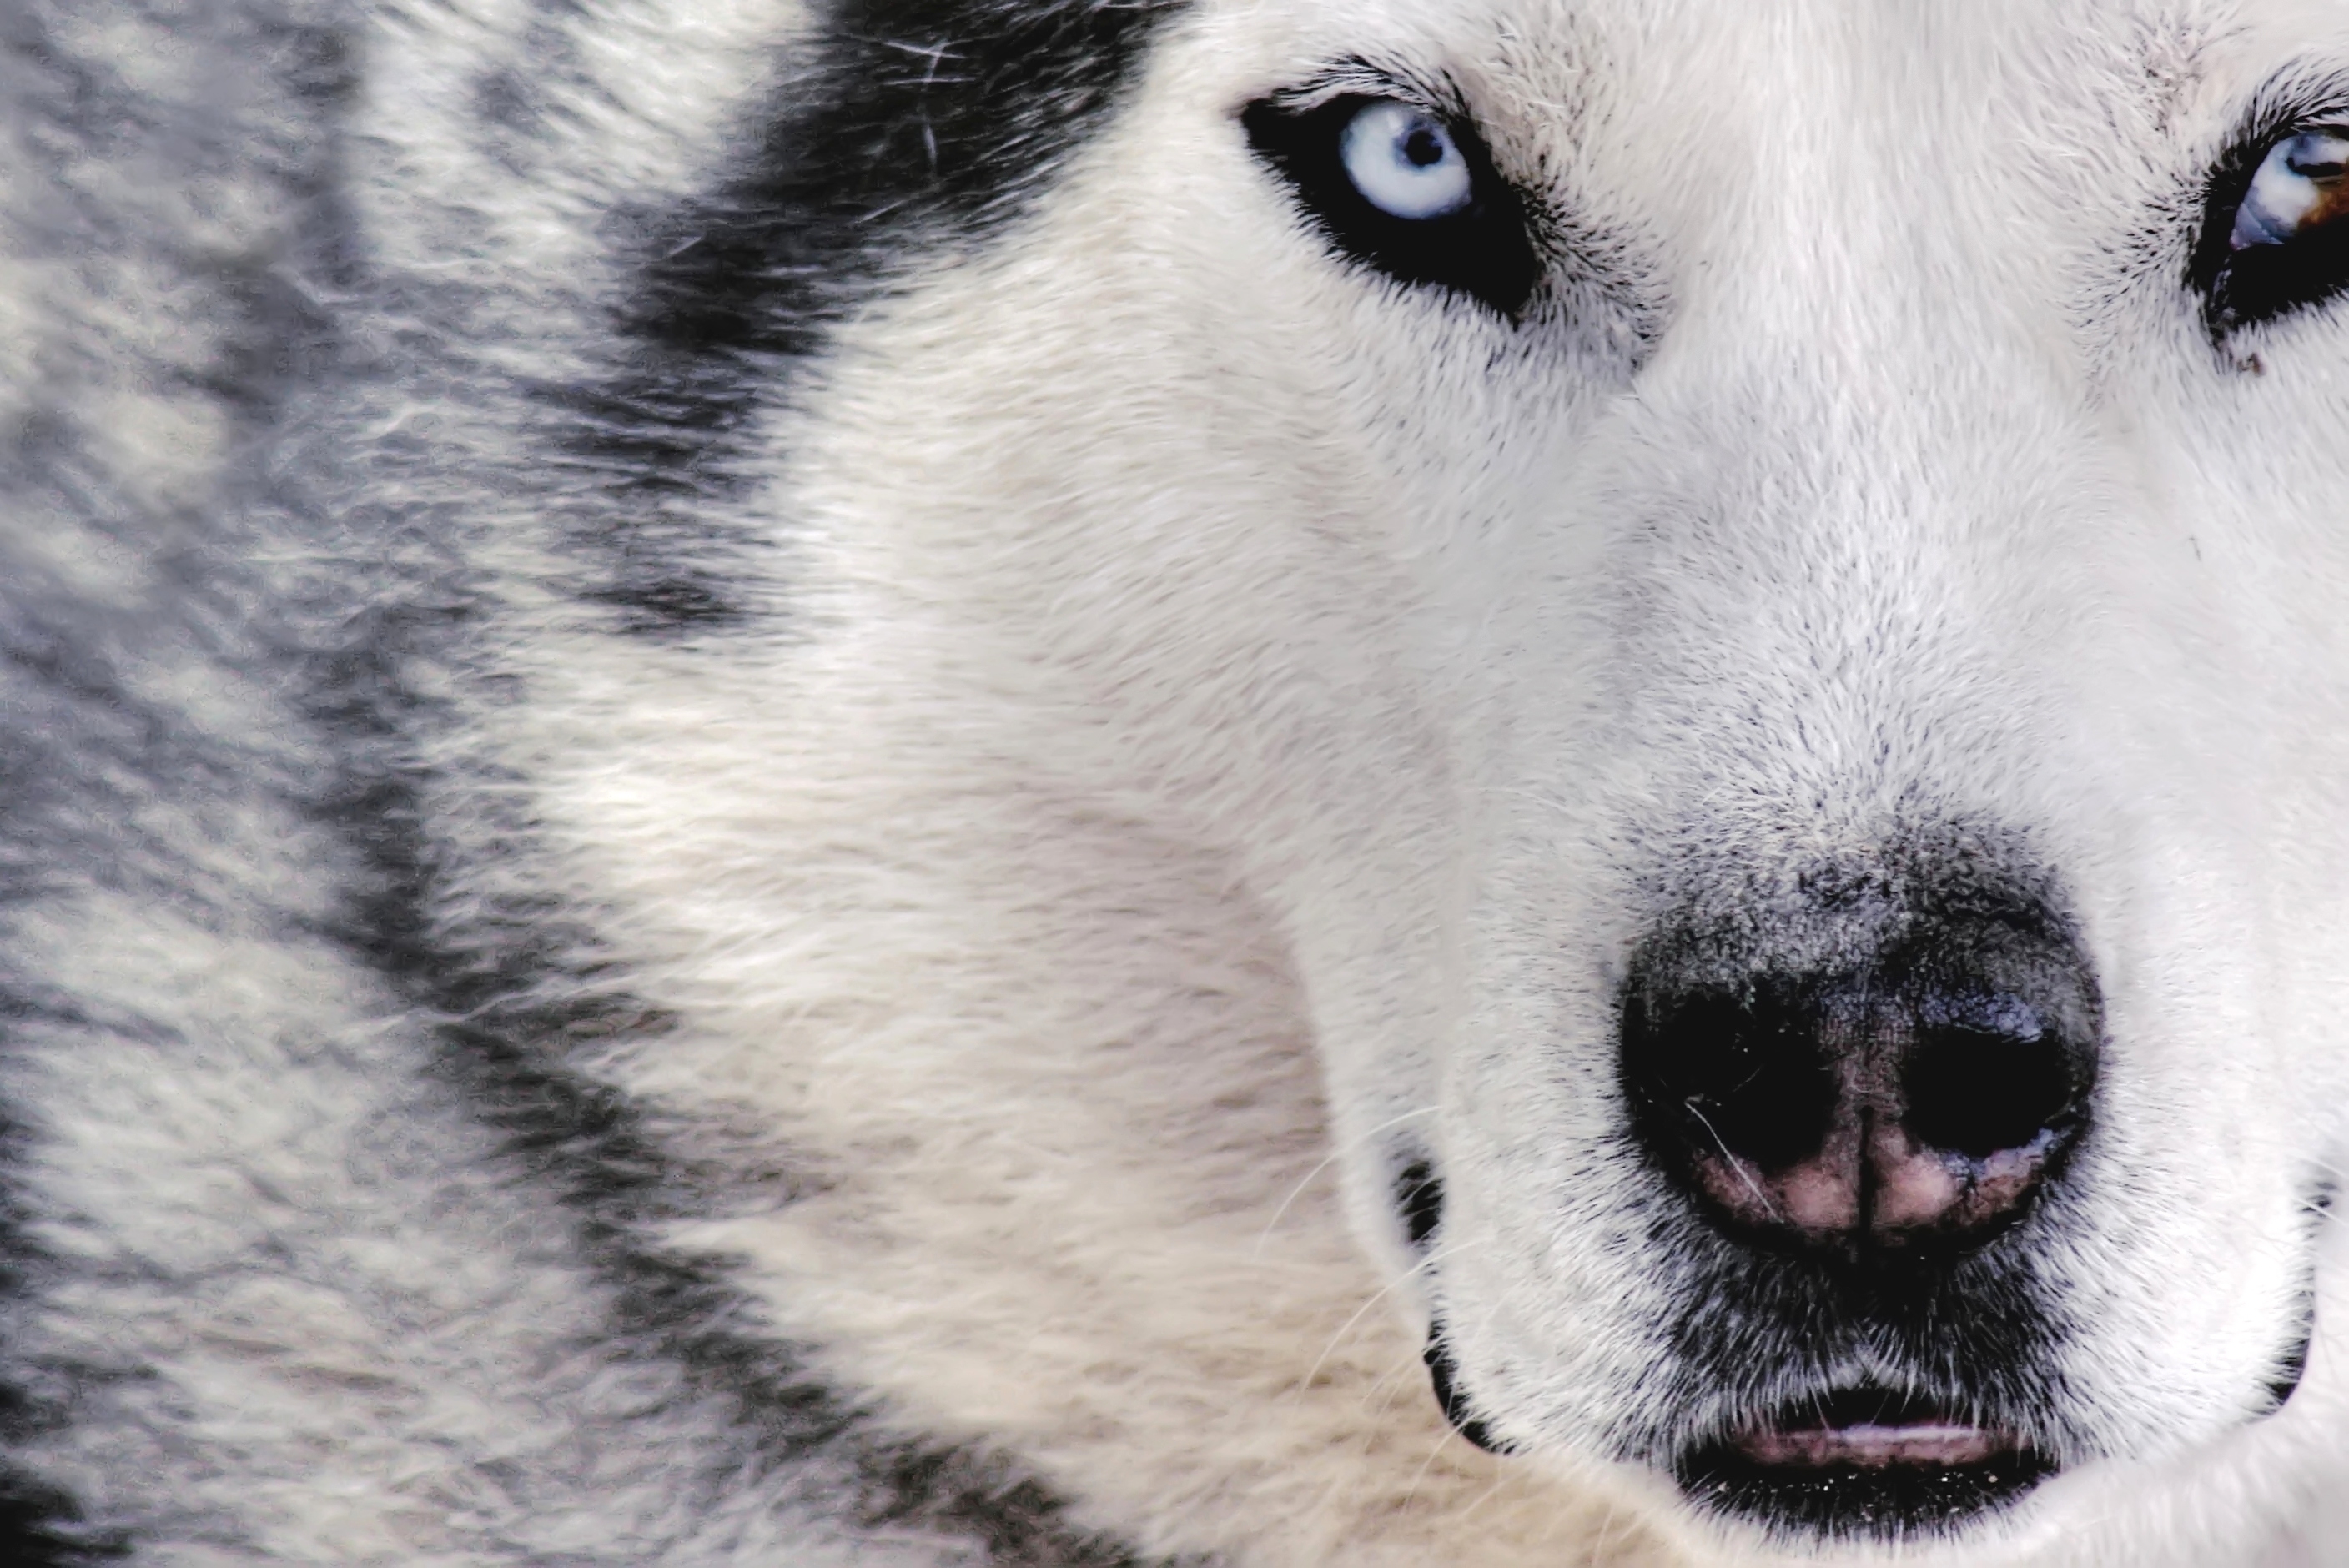 93451 download wallpaper animals, dog, muzzle, spotted, spotty, sight, opinion, husky screensavers and pictures for free